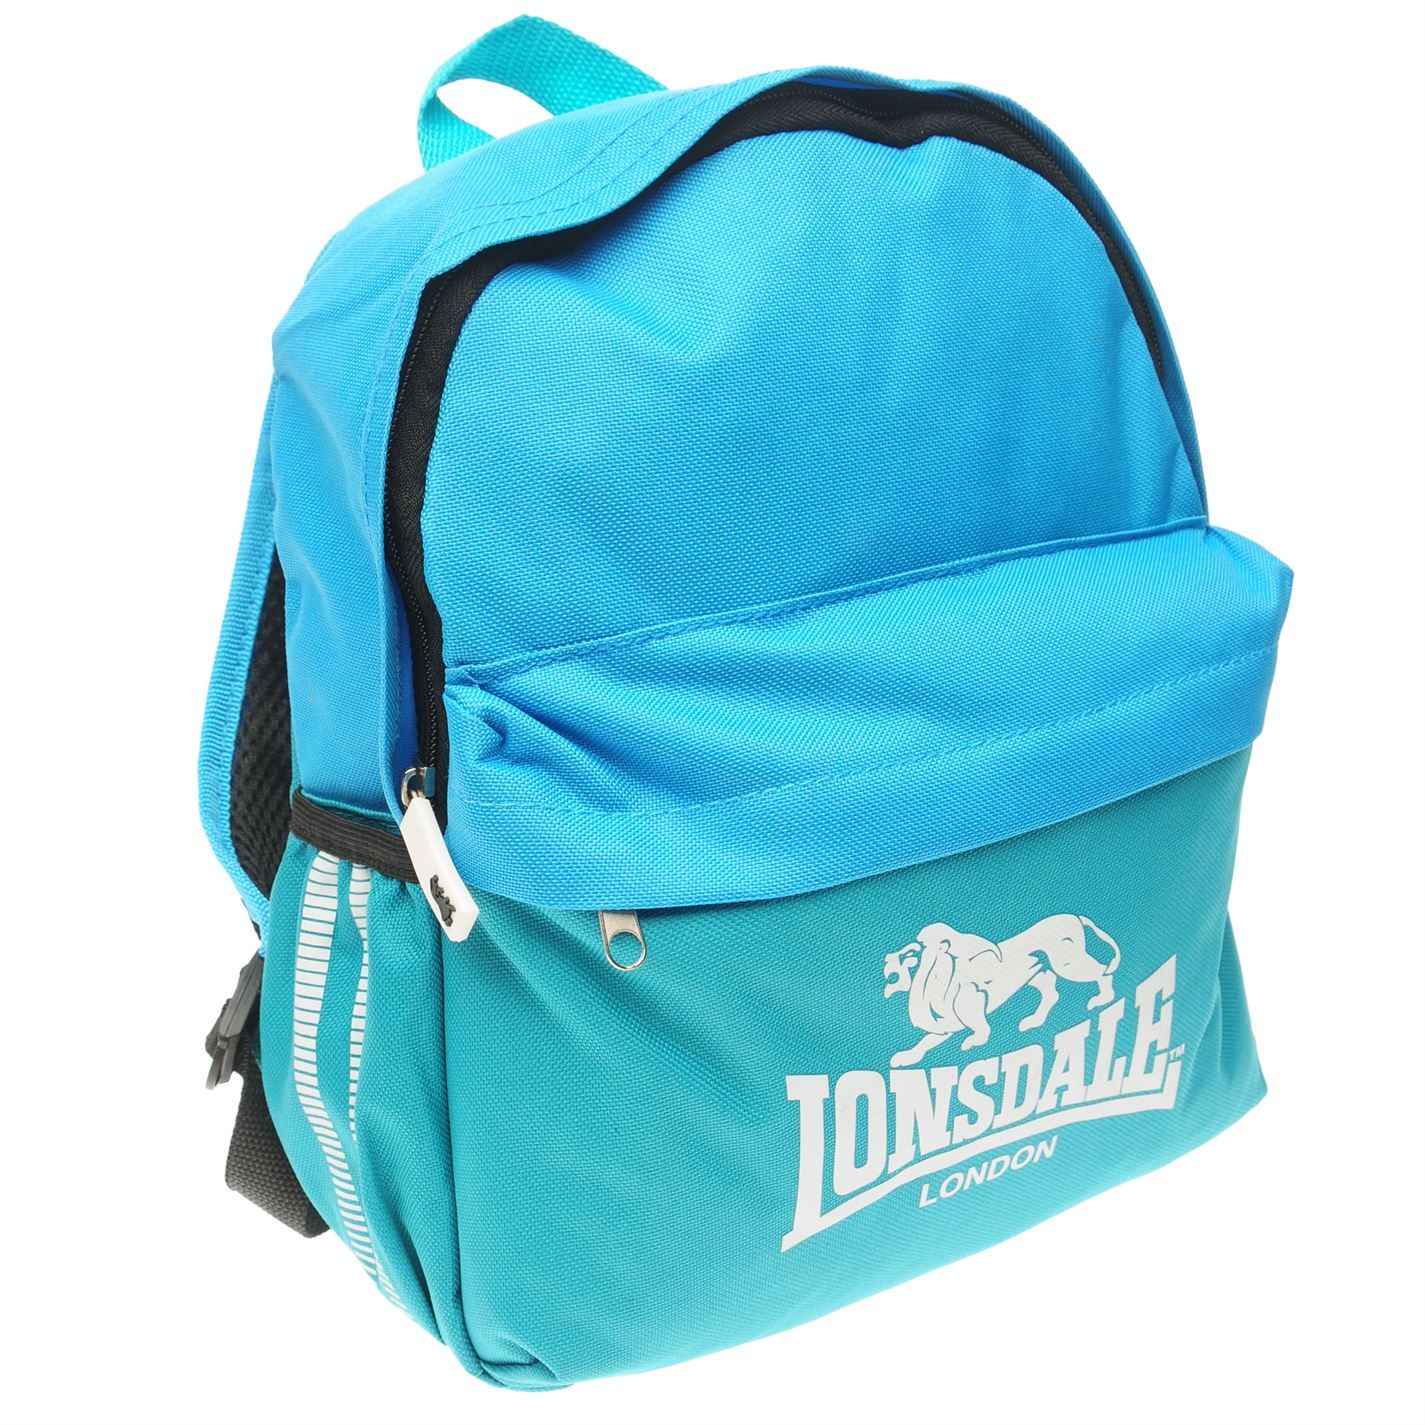 Lonsdale Mini Back Pack Travel Luggage Everyday Casual Bag Accessories